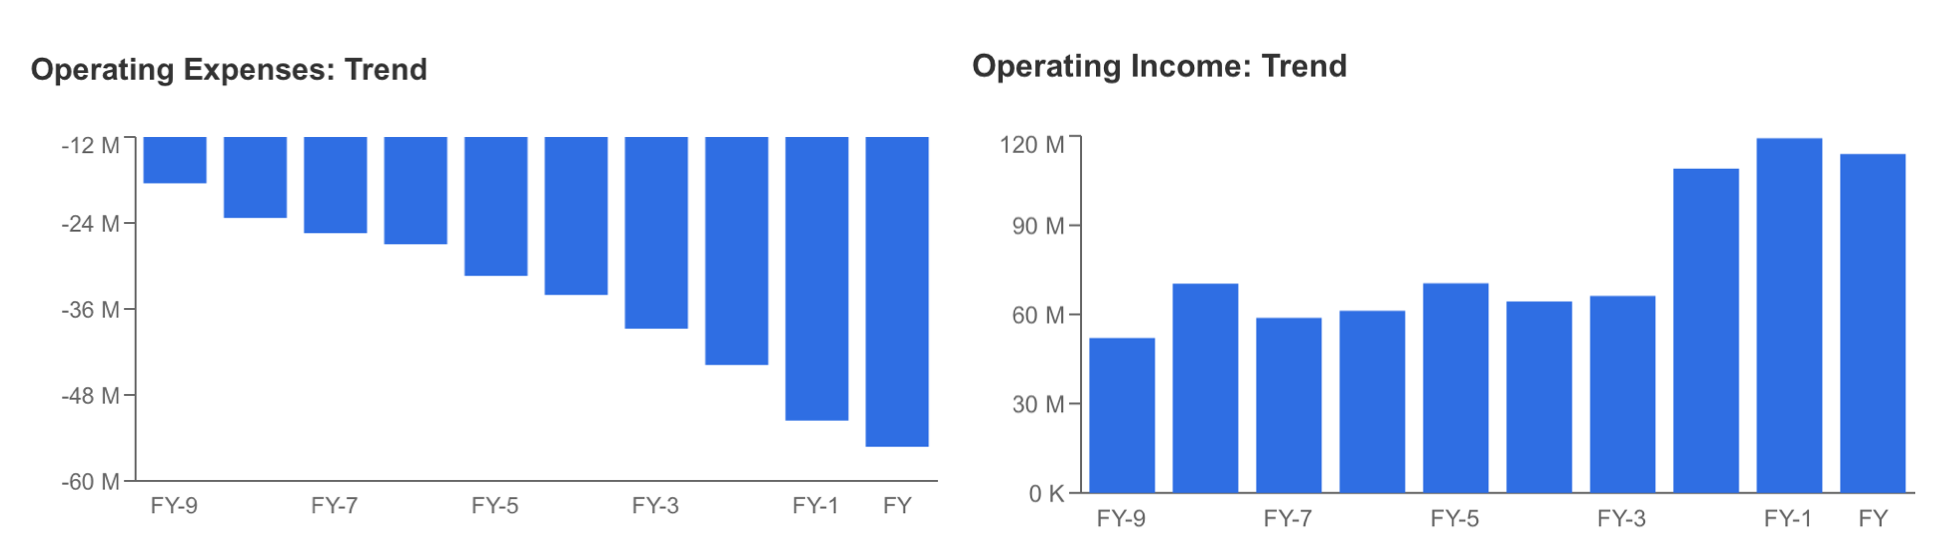 Operating Expenses, Operating Income